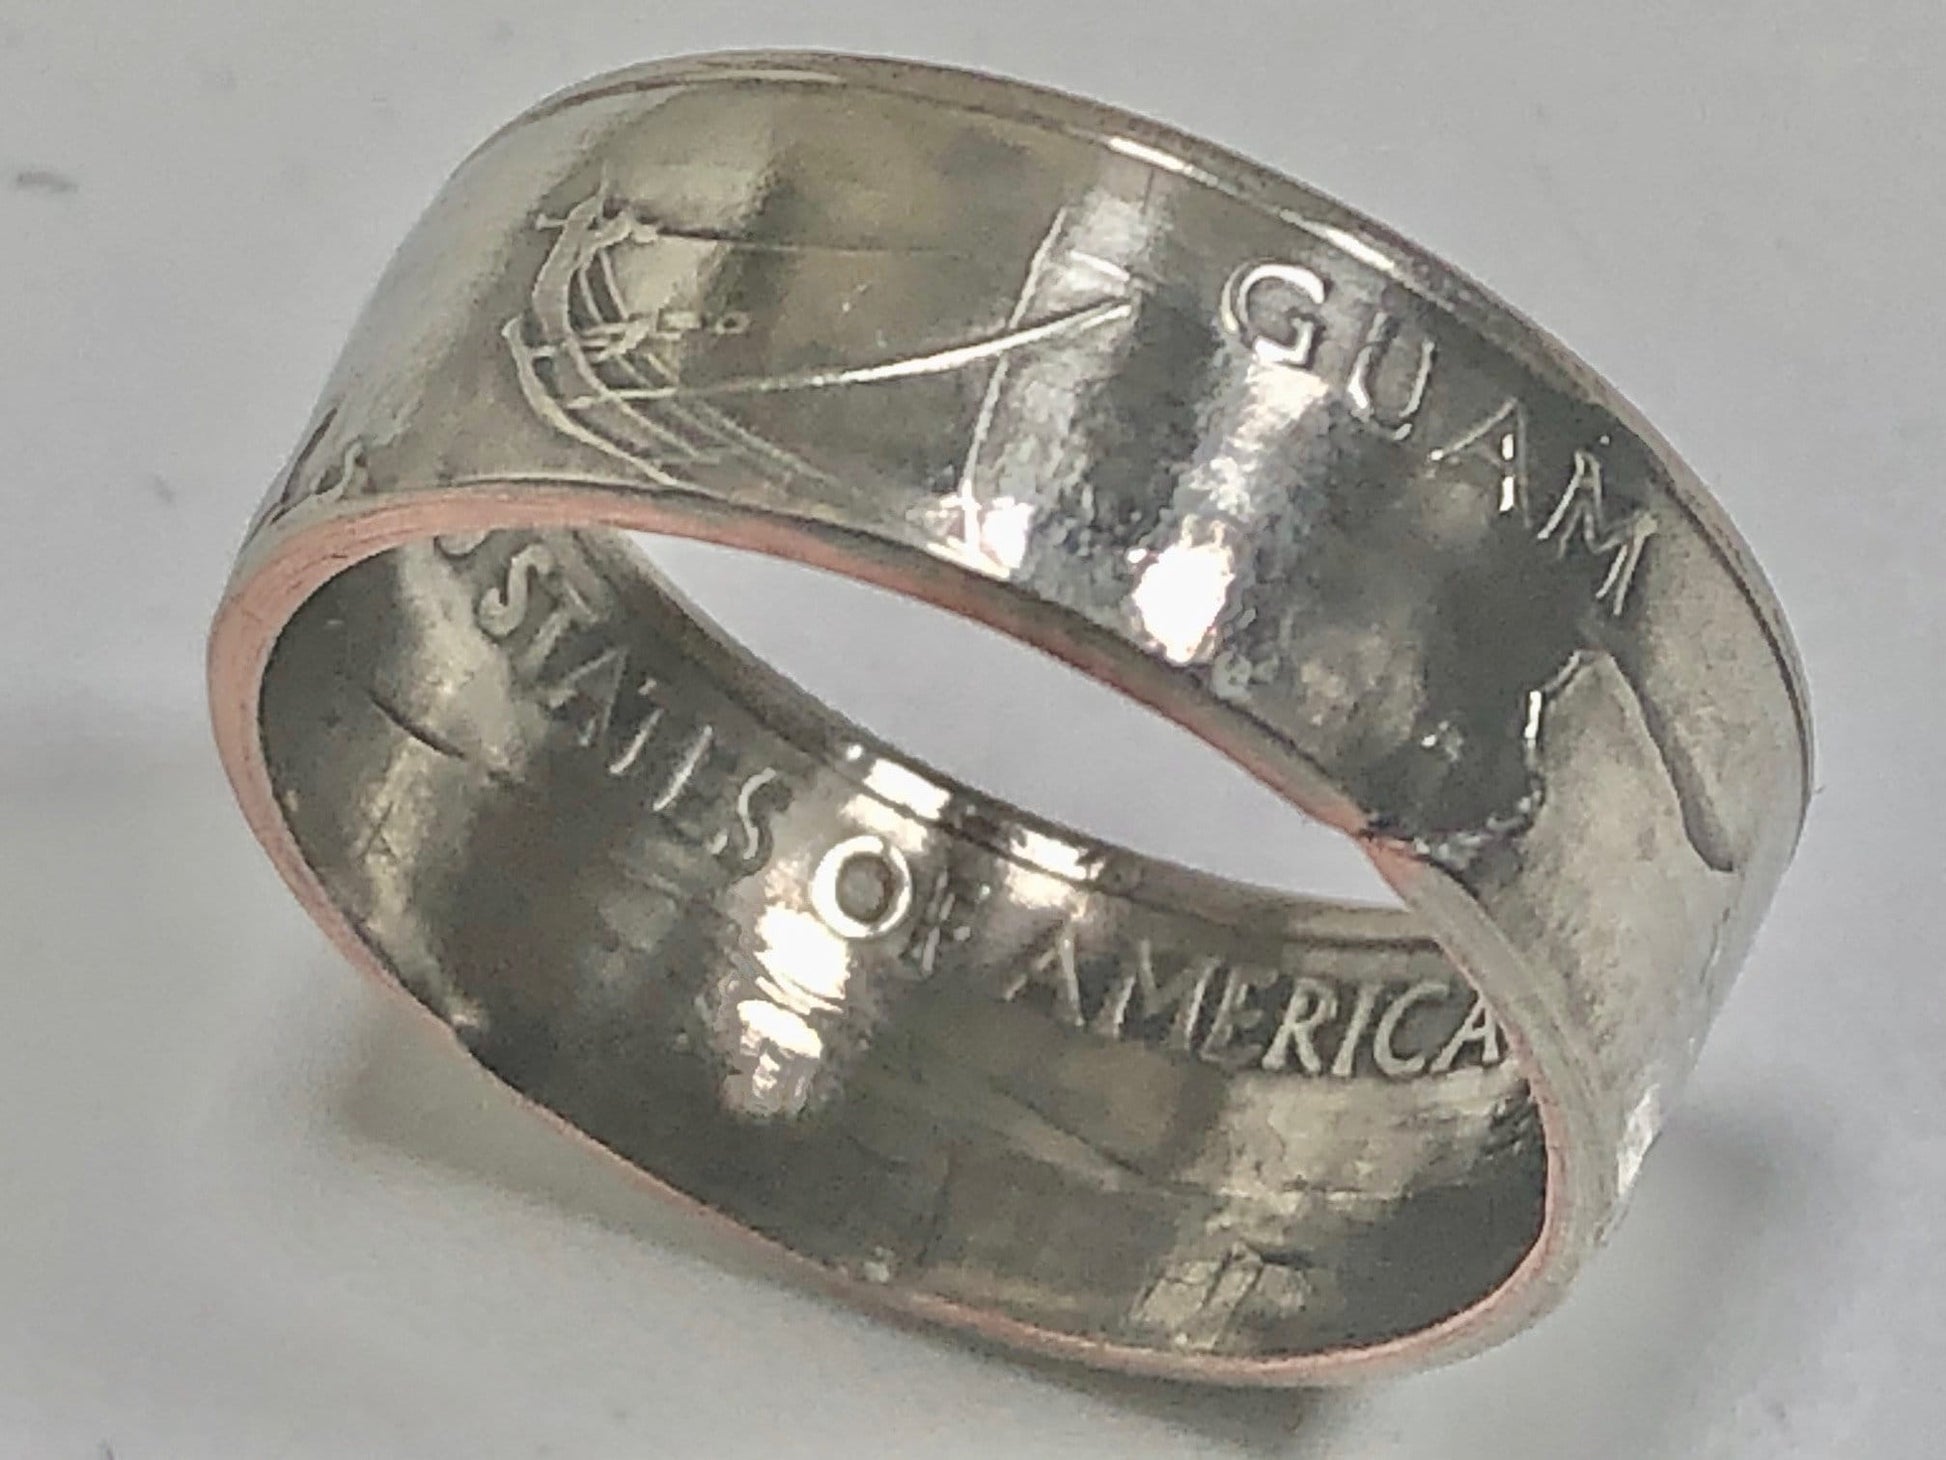 Guam Ring Quarter Coin Ring Handmade Personal Jewelry Ring Gift For Friend Coin Ring Gift For Him Her World Coin Collector